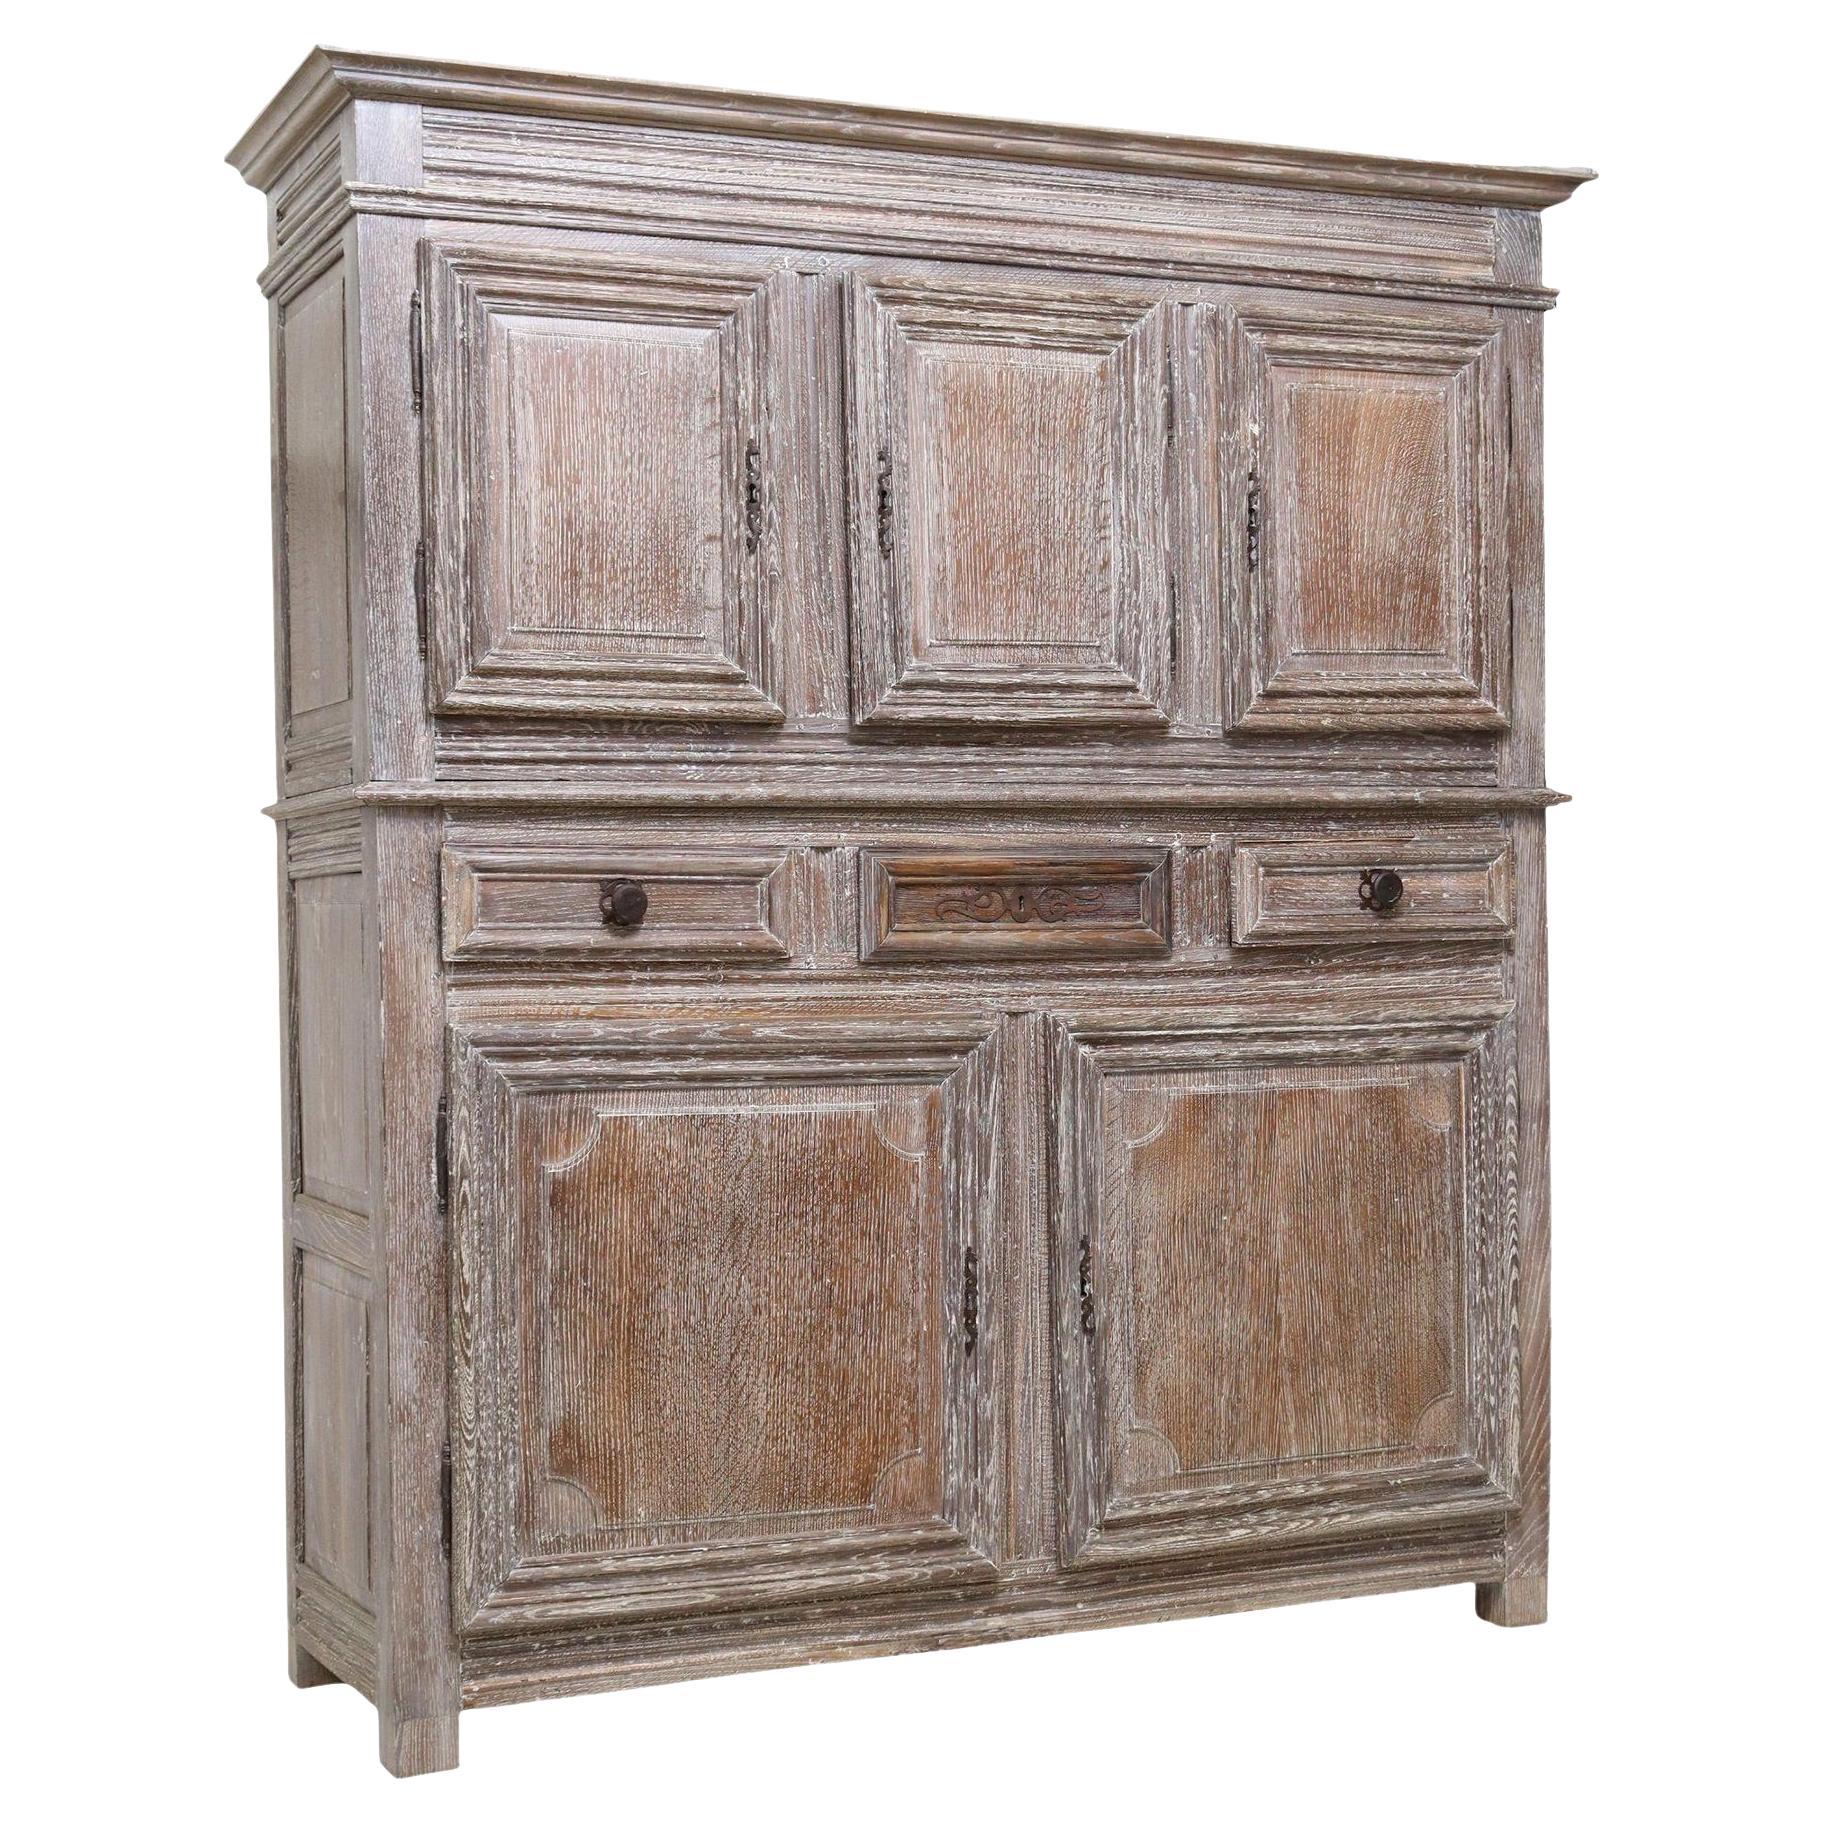 Antique French Provincial Gray Washed Distressed Finish Large Sideboard